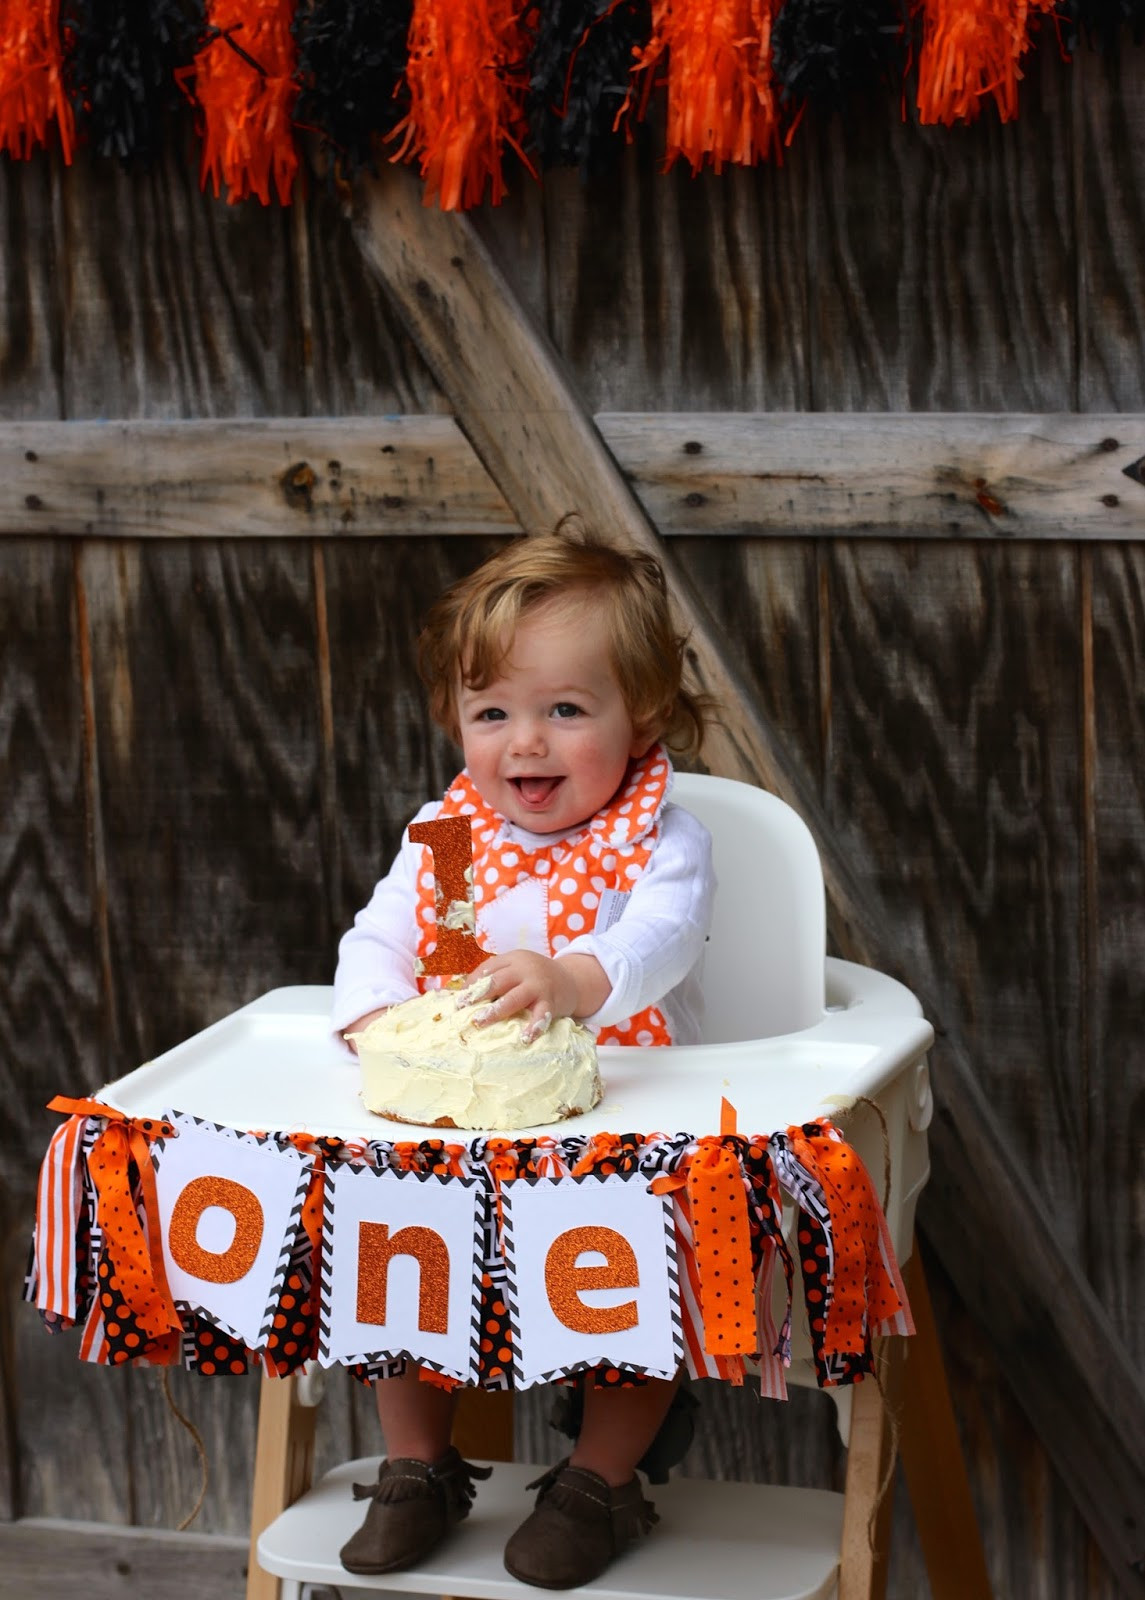 Halloween First Birthday Party Ideas
 A Halloween First Birthday Party Invites Decor and Party